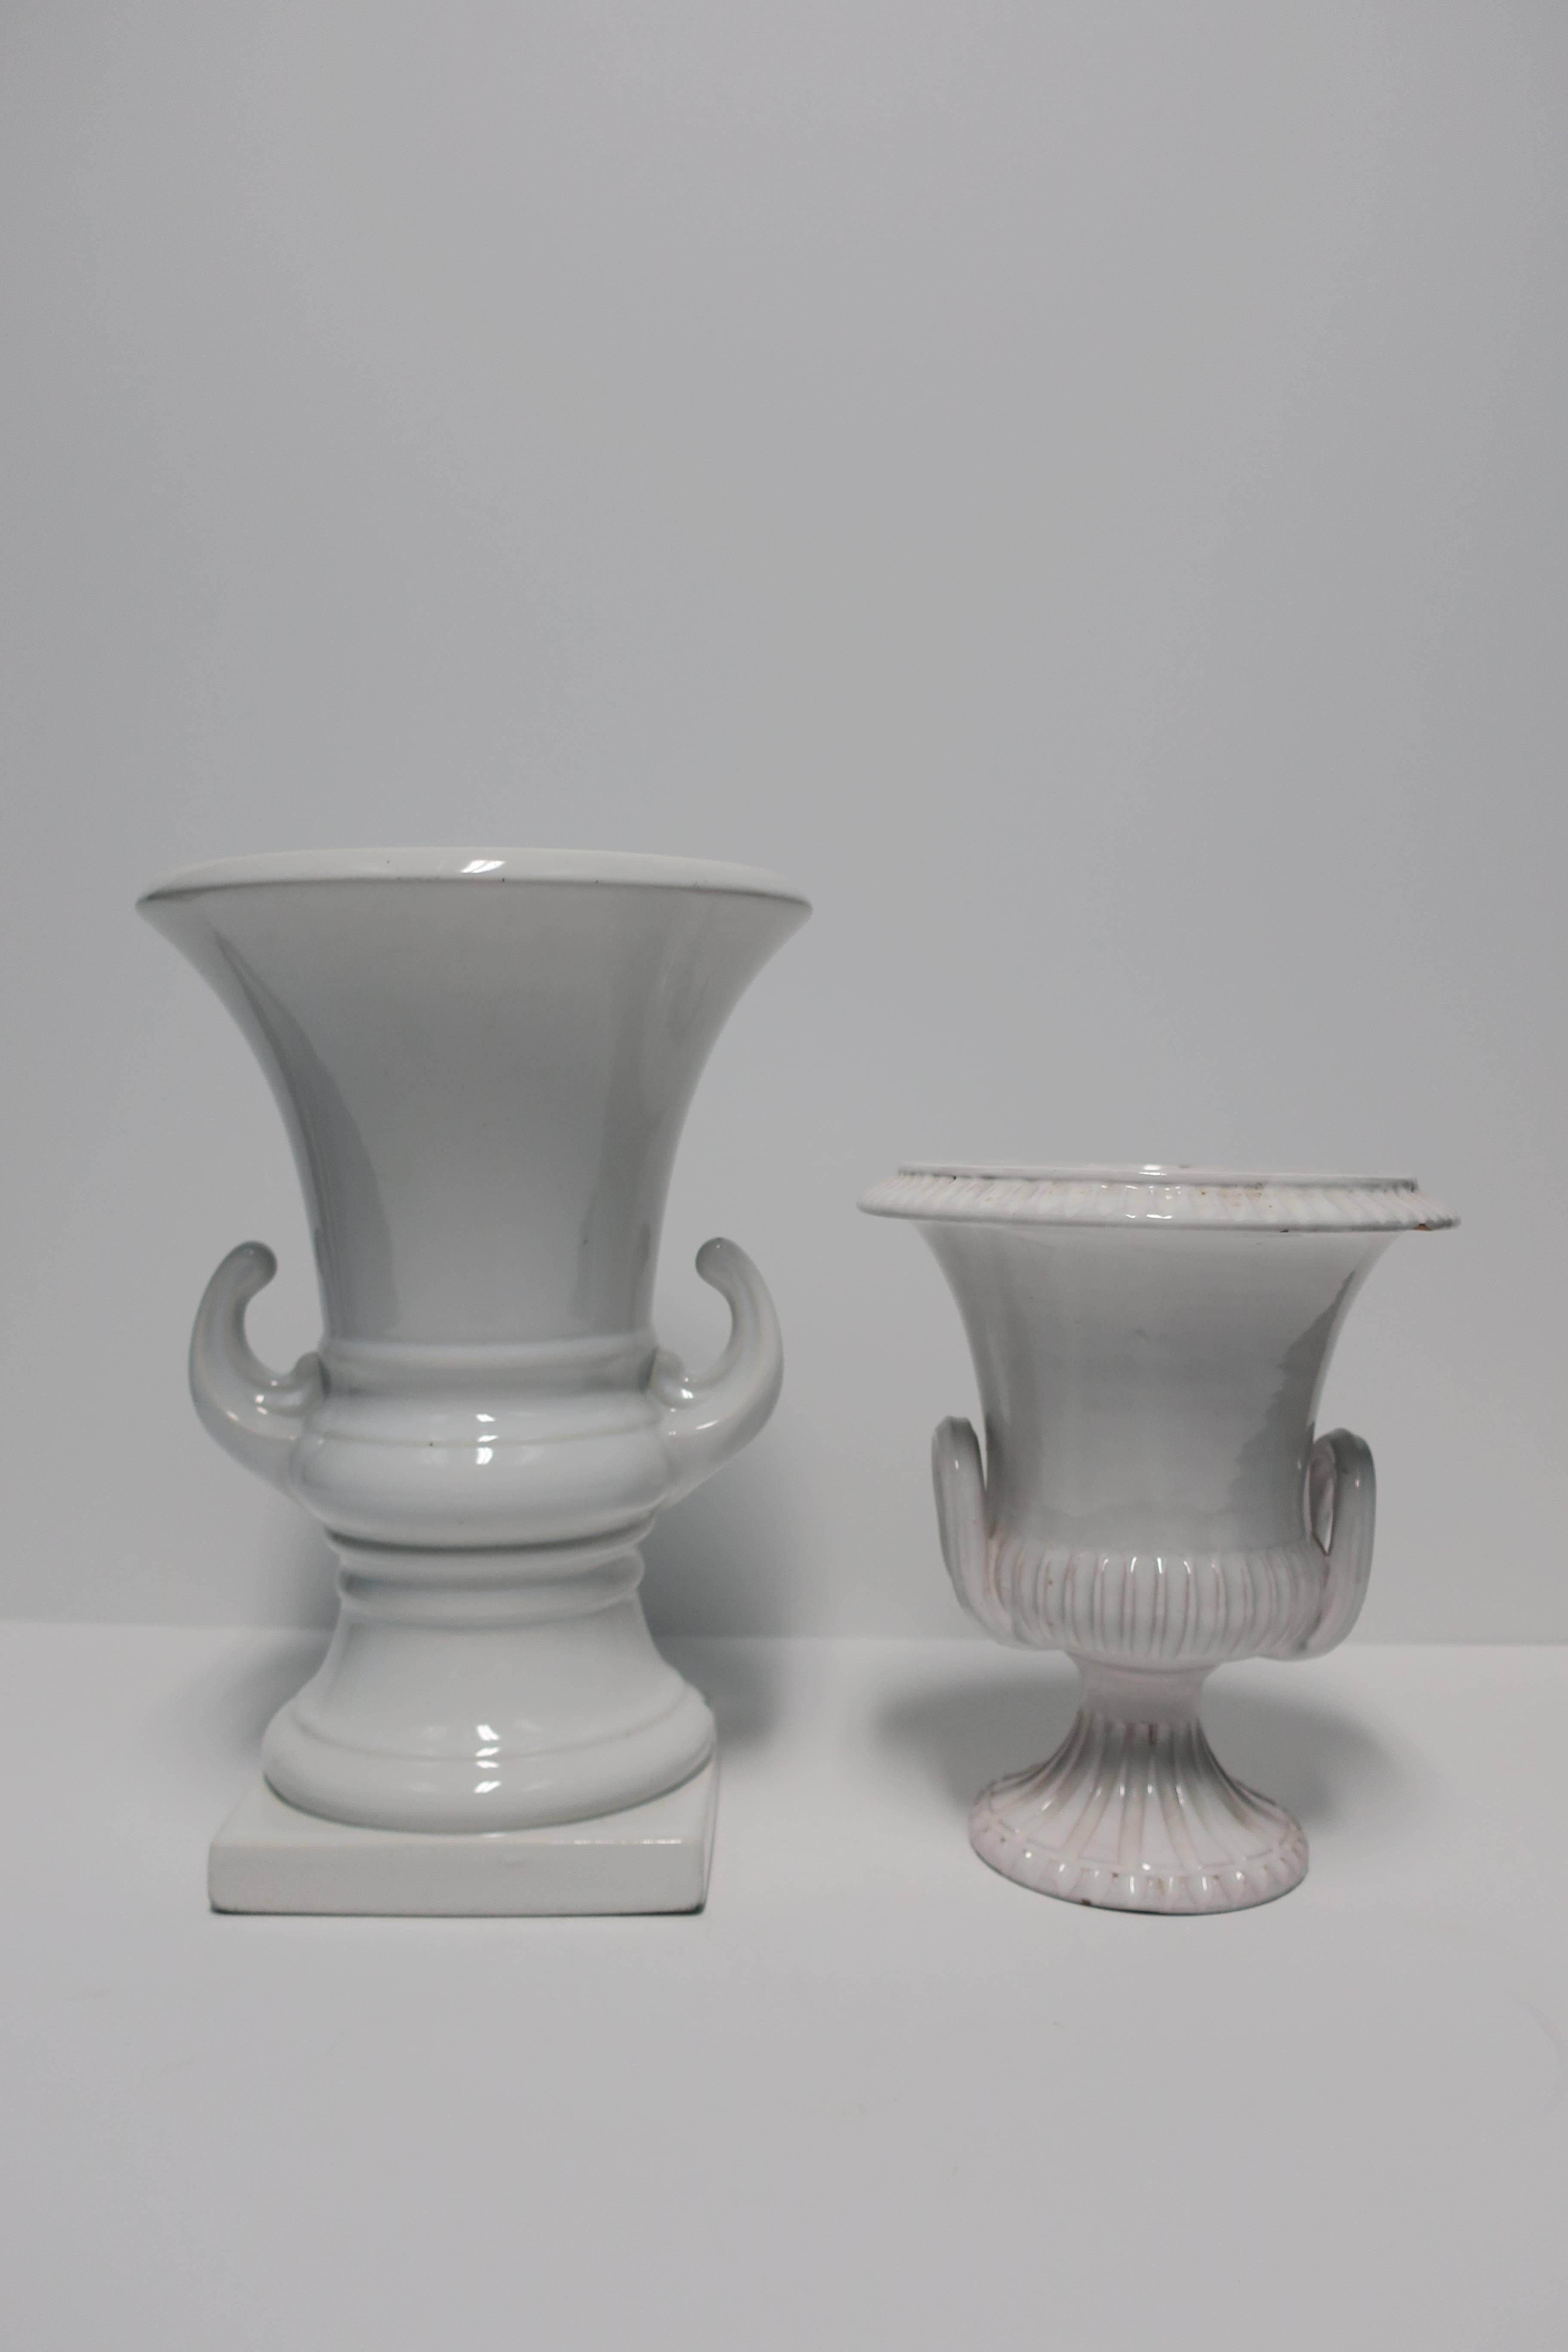 A vintage pair/set of classic Italian white pottery urns vessels or vases, circa late-20th century, Italy. Both are marked 'Made in Italy' on bottom as show in images #9 and 10. Great as standalone pieces or with flowers. 

Measurements:
Large: 12